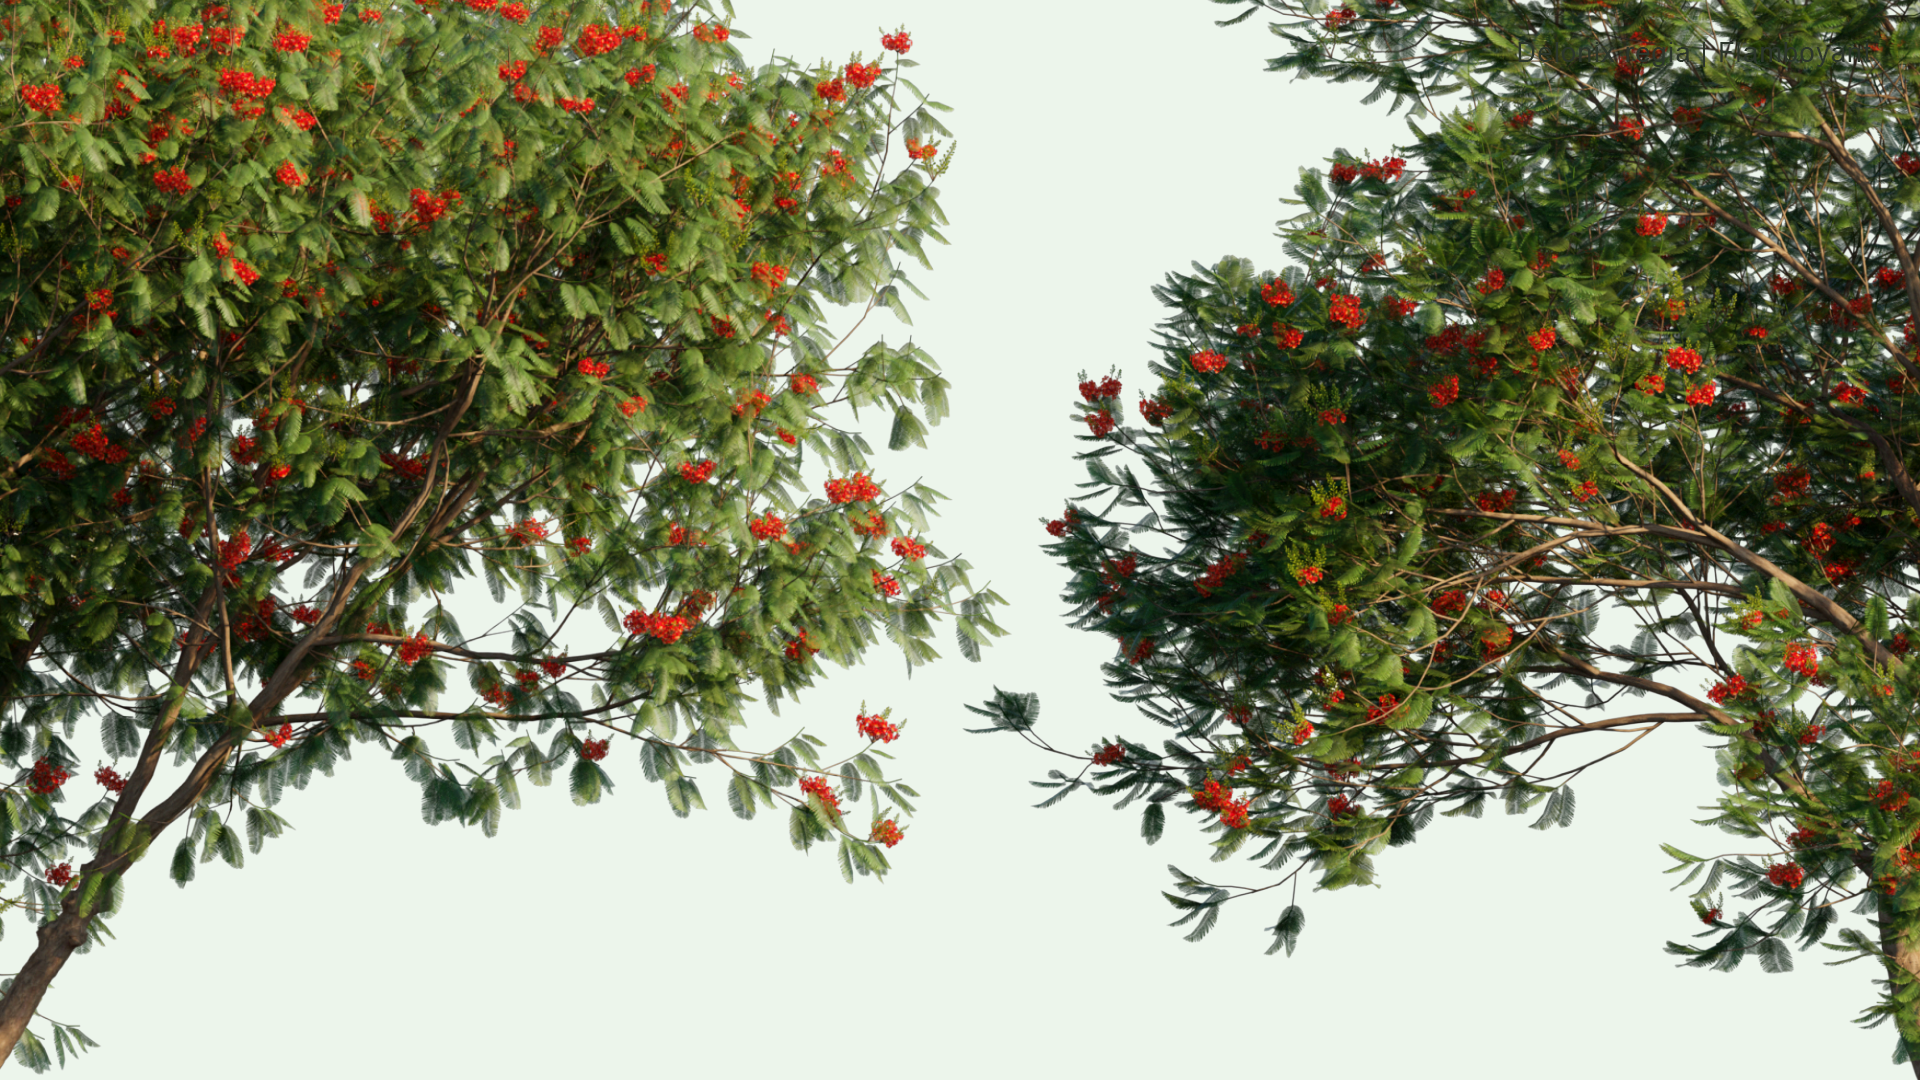 2D Delonix Regia - Royal Poinciana, Flamboyant, Flame of The Forest, Flame Tree